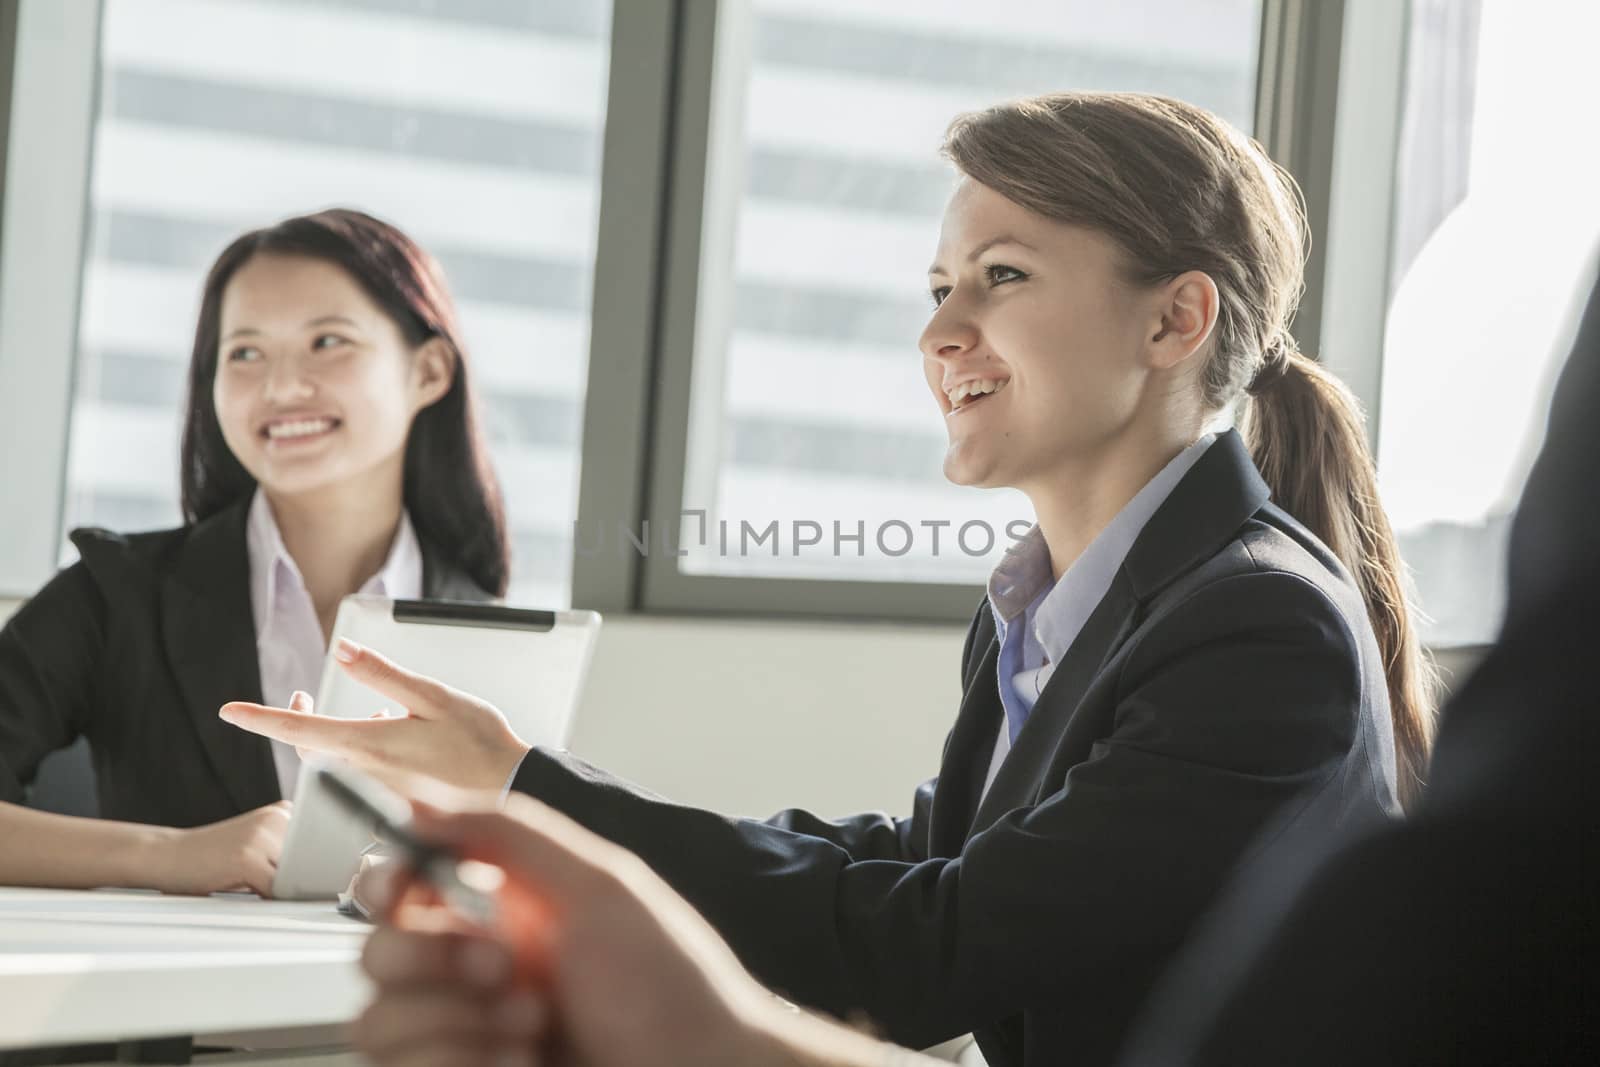 Two businesswomen smiling, discussing, and gesturing during a business meeting